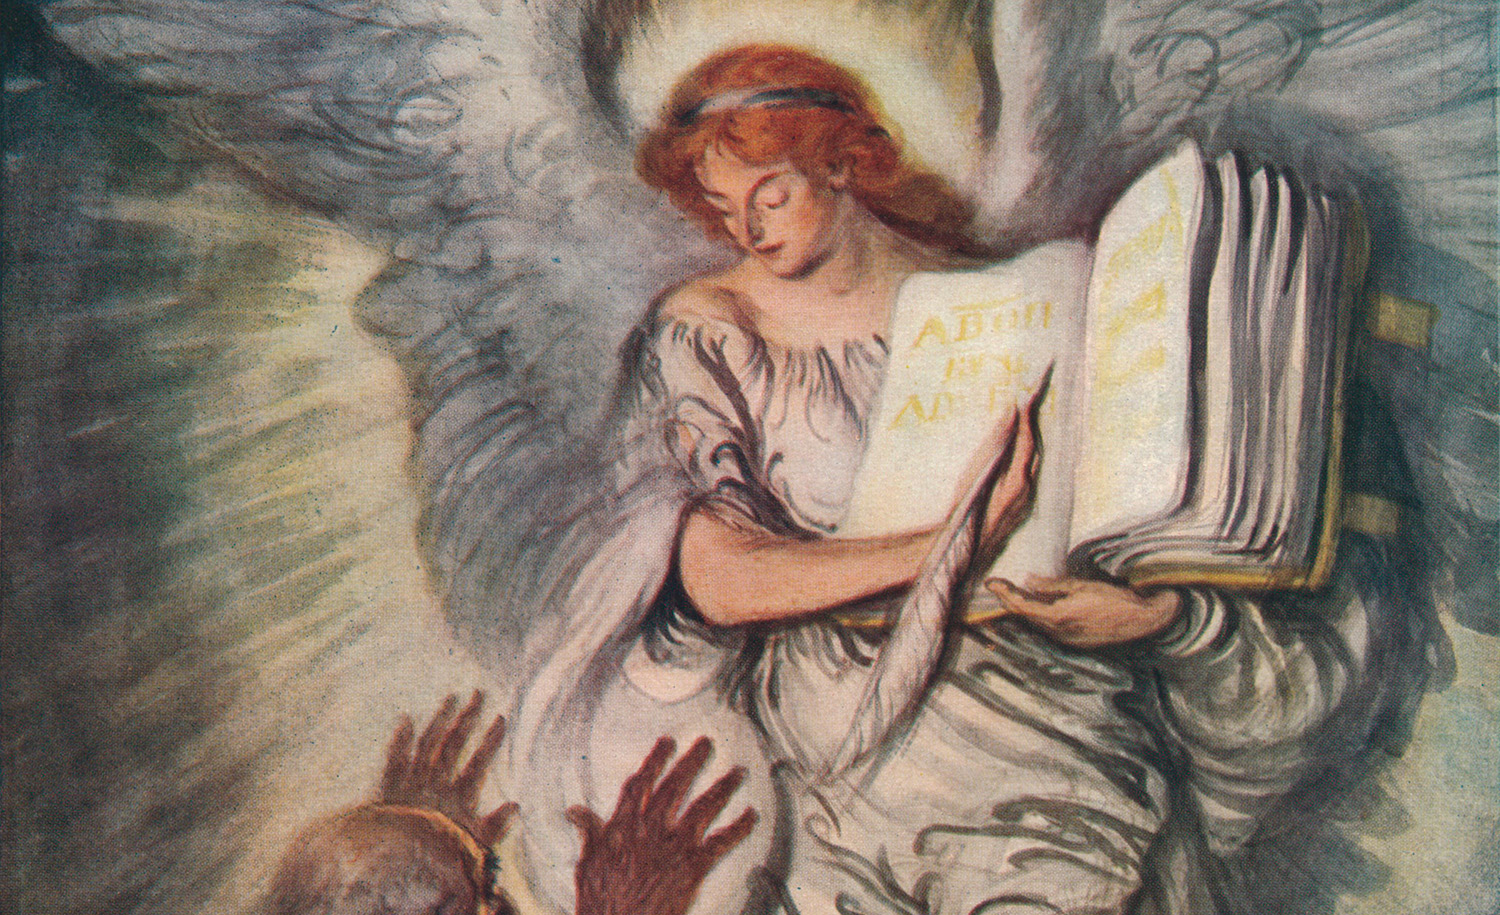 From And When the Angel Showed Him the Names of Those Whom Love of God Had Blest, 1916, Edmund Joseph Sullivan. Heritage Image Partnership Ltd/Alamy Stock Photo.
